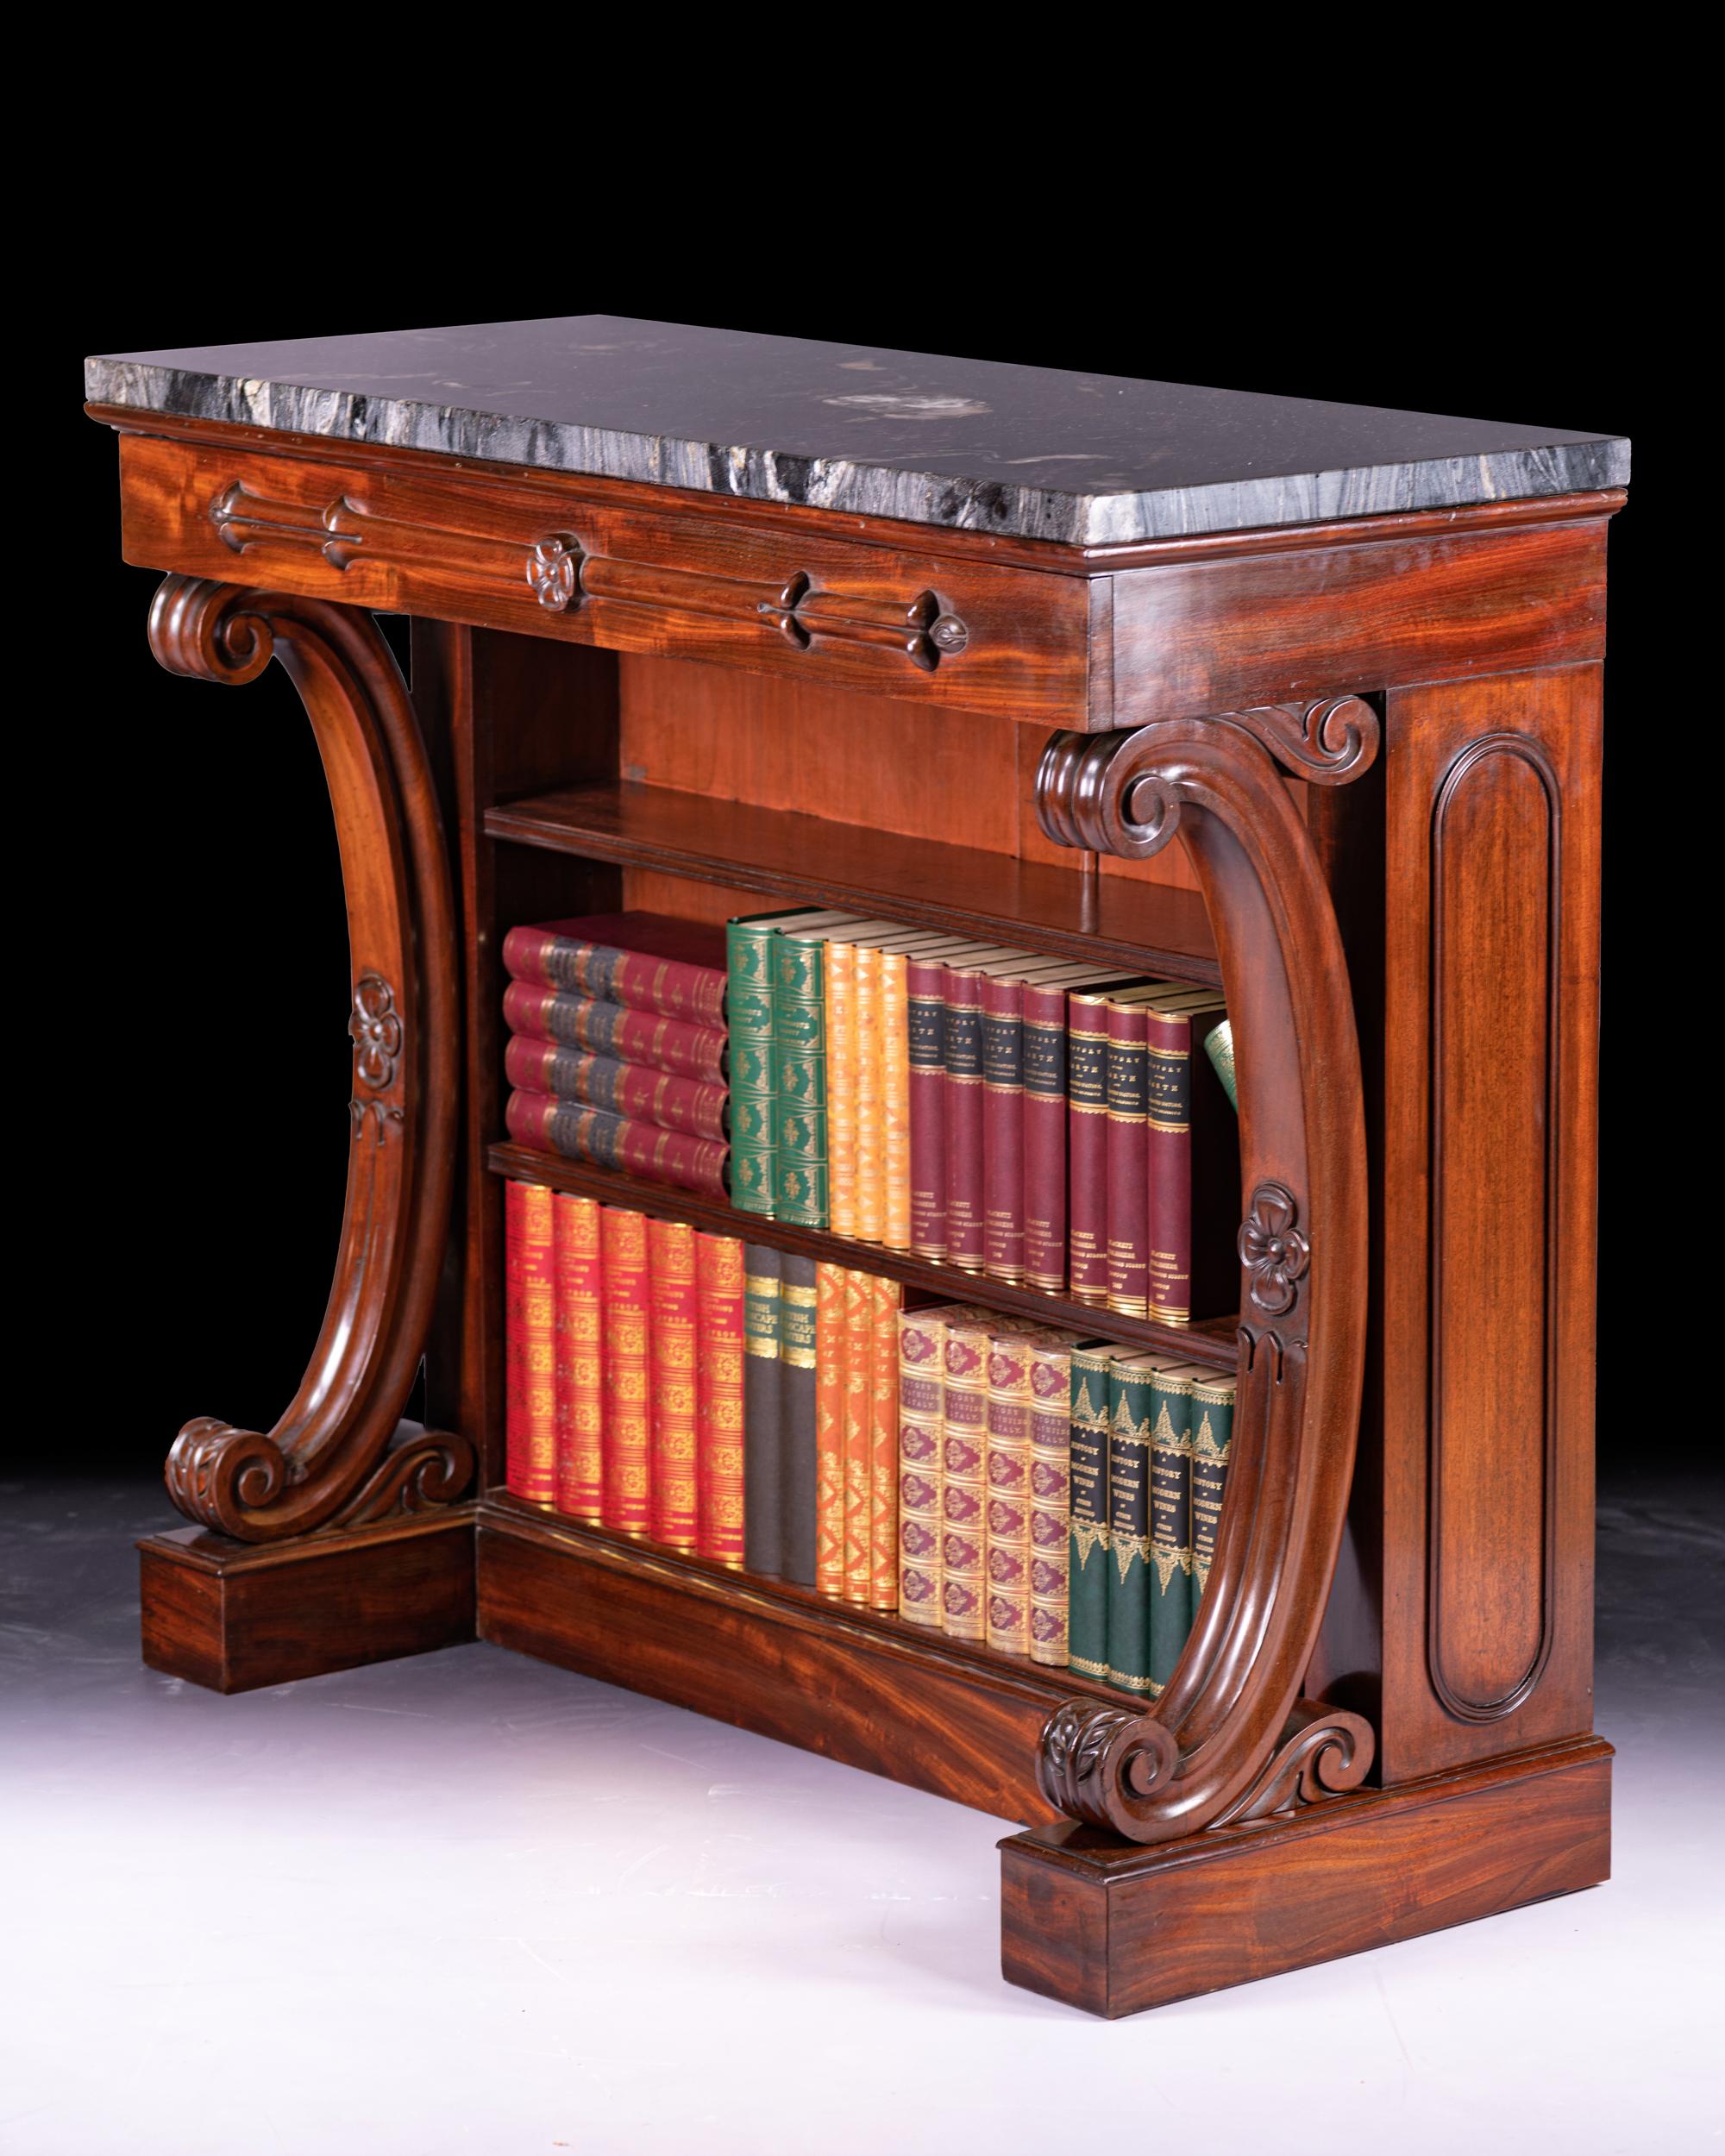 A very fine and most attractive Irish William IV period mahogany open bookcase/console table, of concave design, with grey marble panel above a hidden drawer set with rosettes and three open book tiers, on outset plinth base.

Circa 1830

Irish